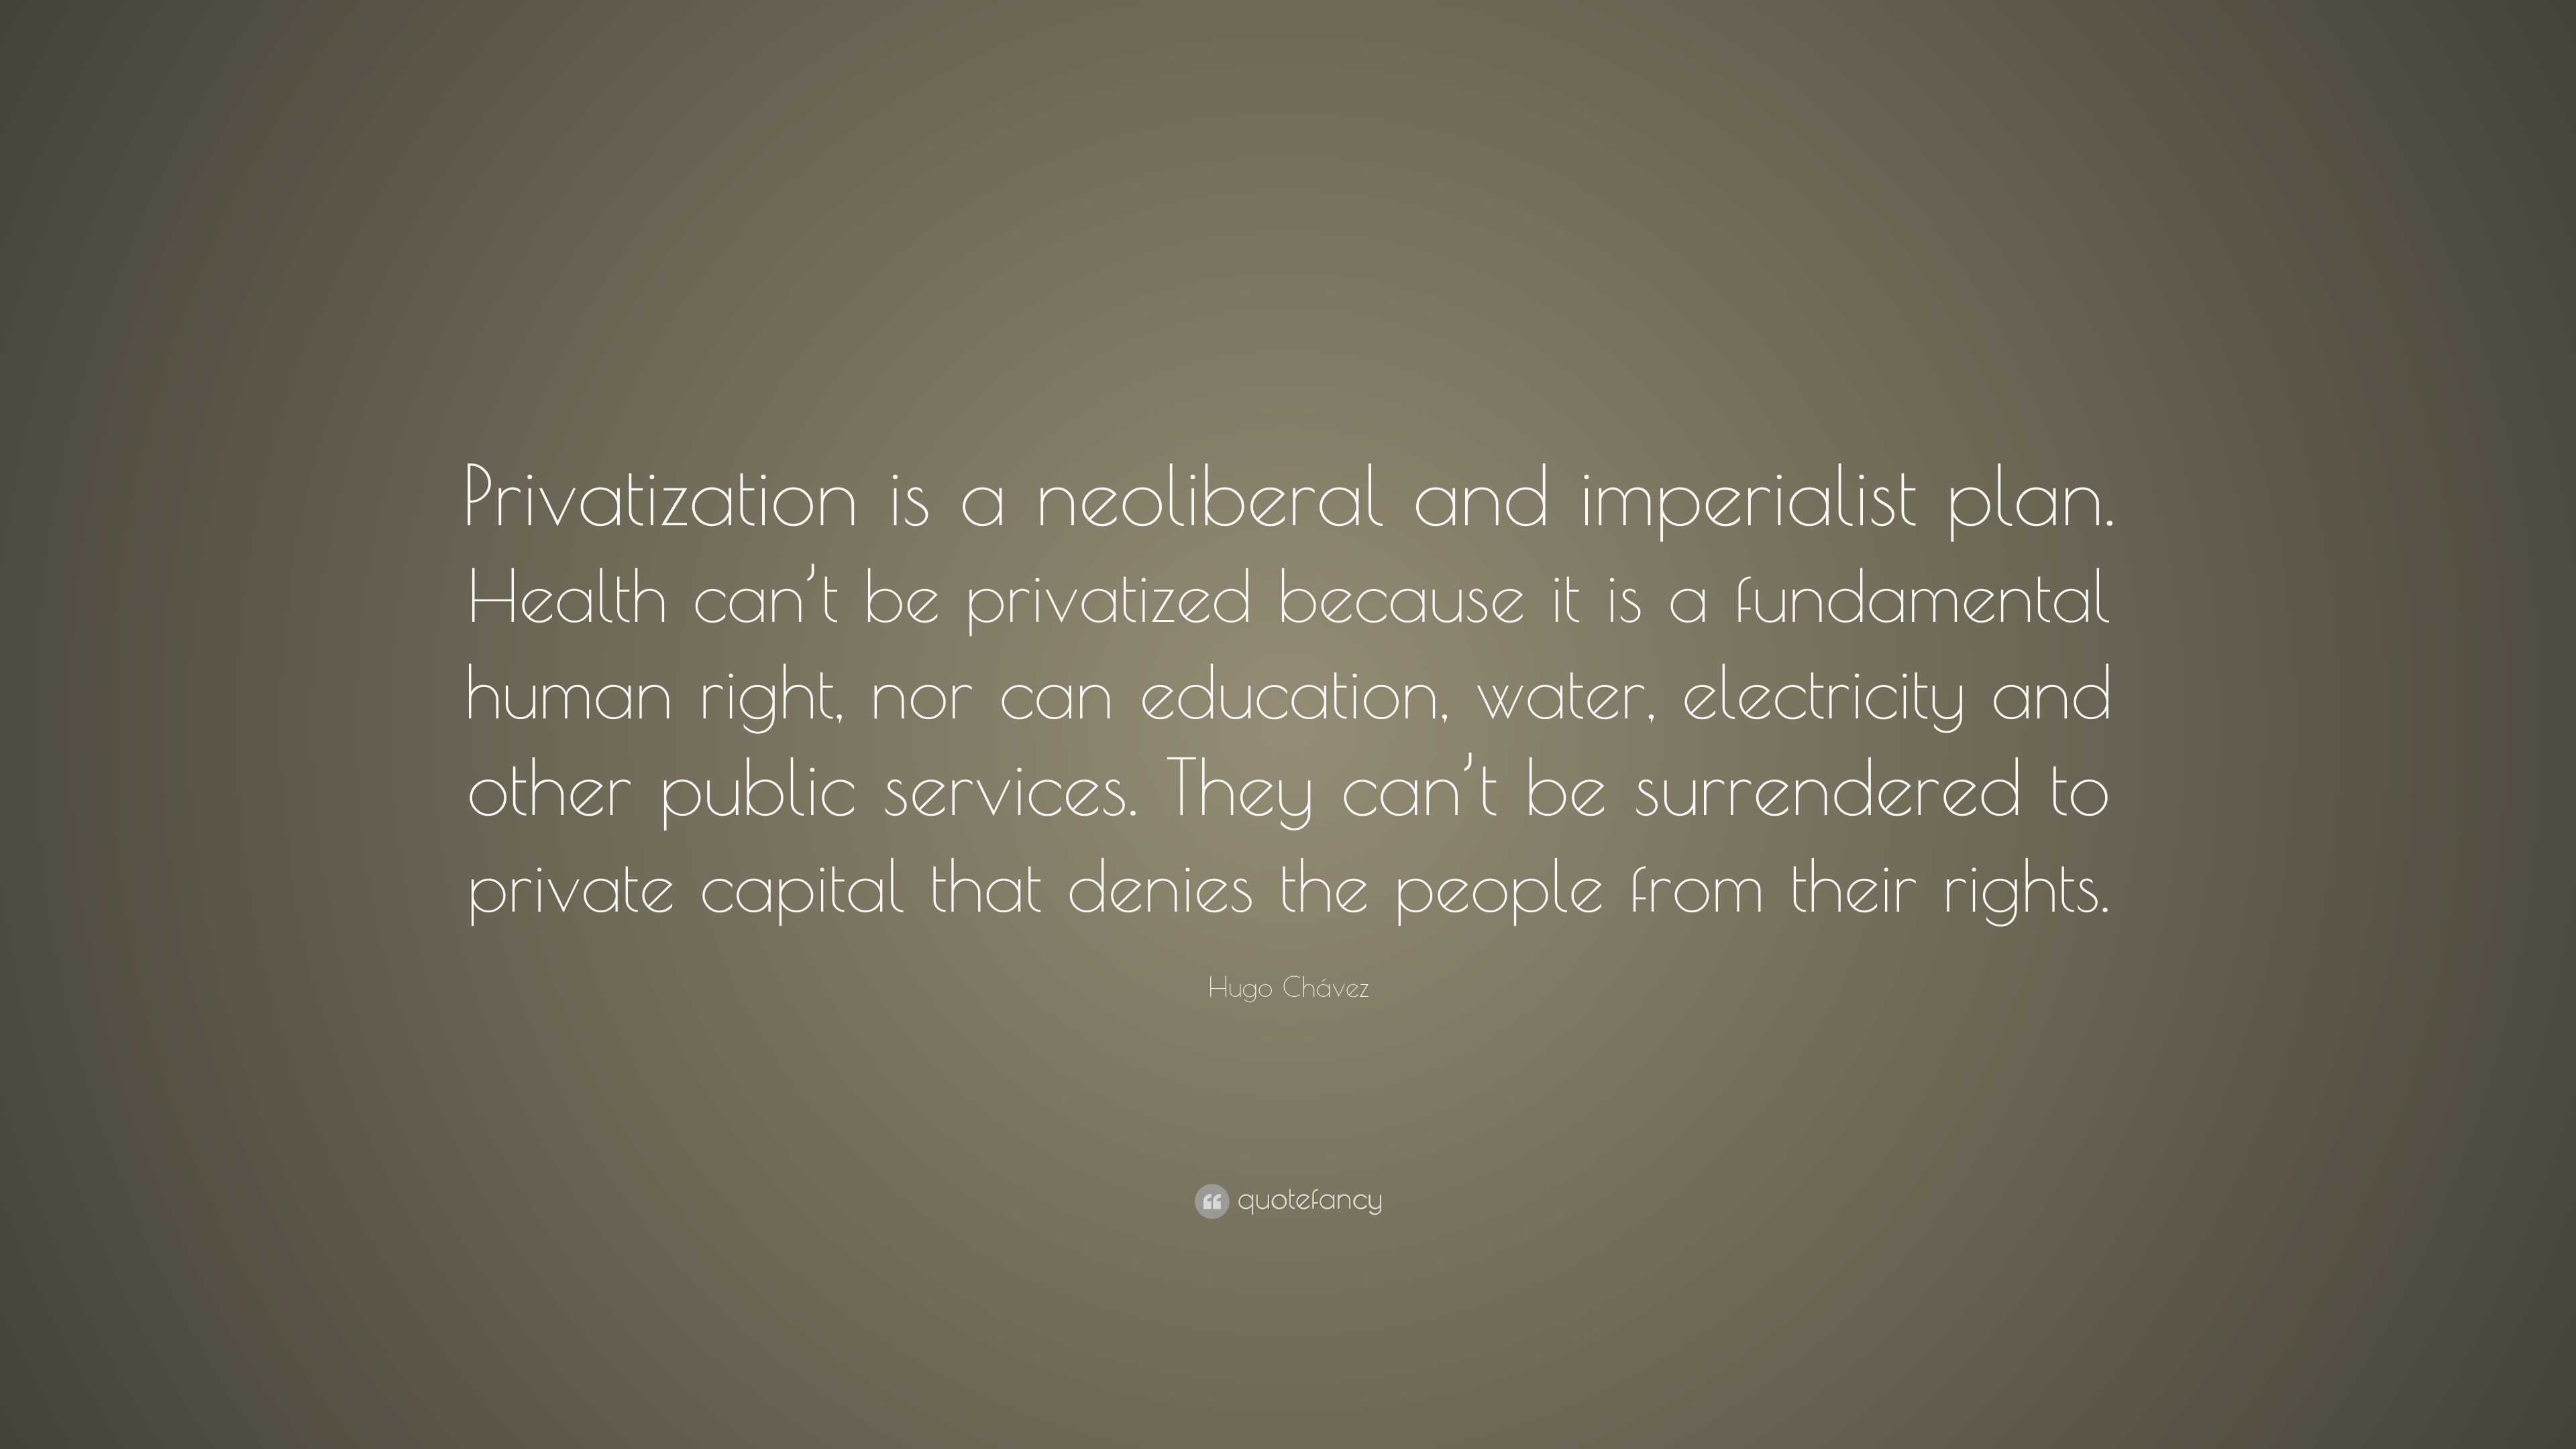 Hugo Chávez Quote: “Privatization is a neoliberal and imperialist plan ...